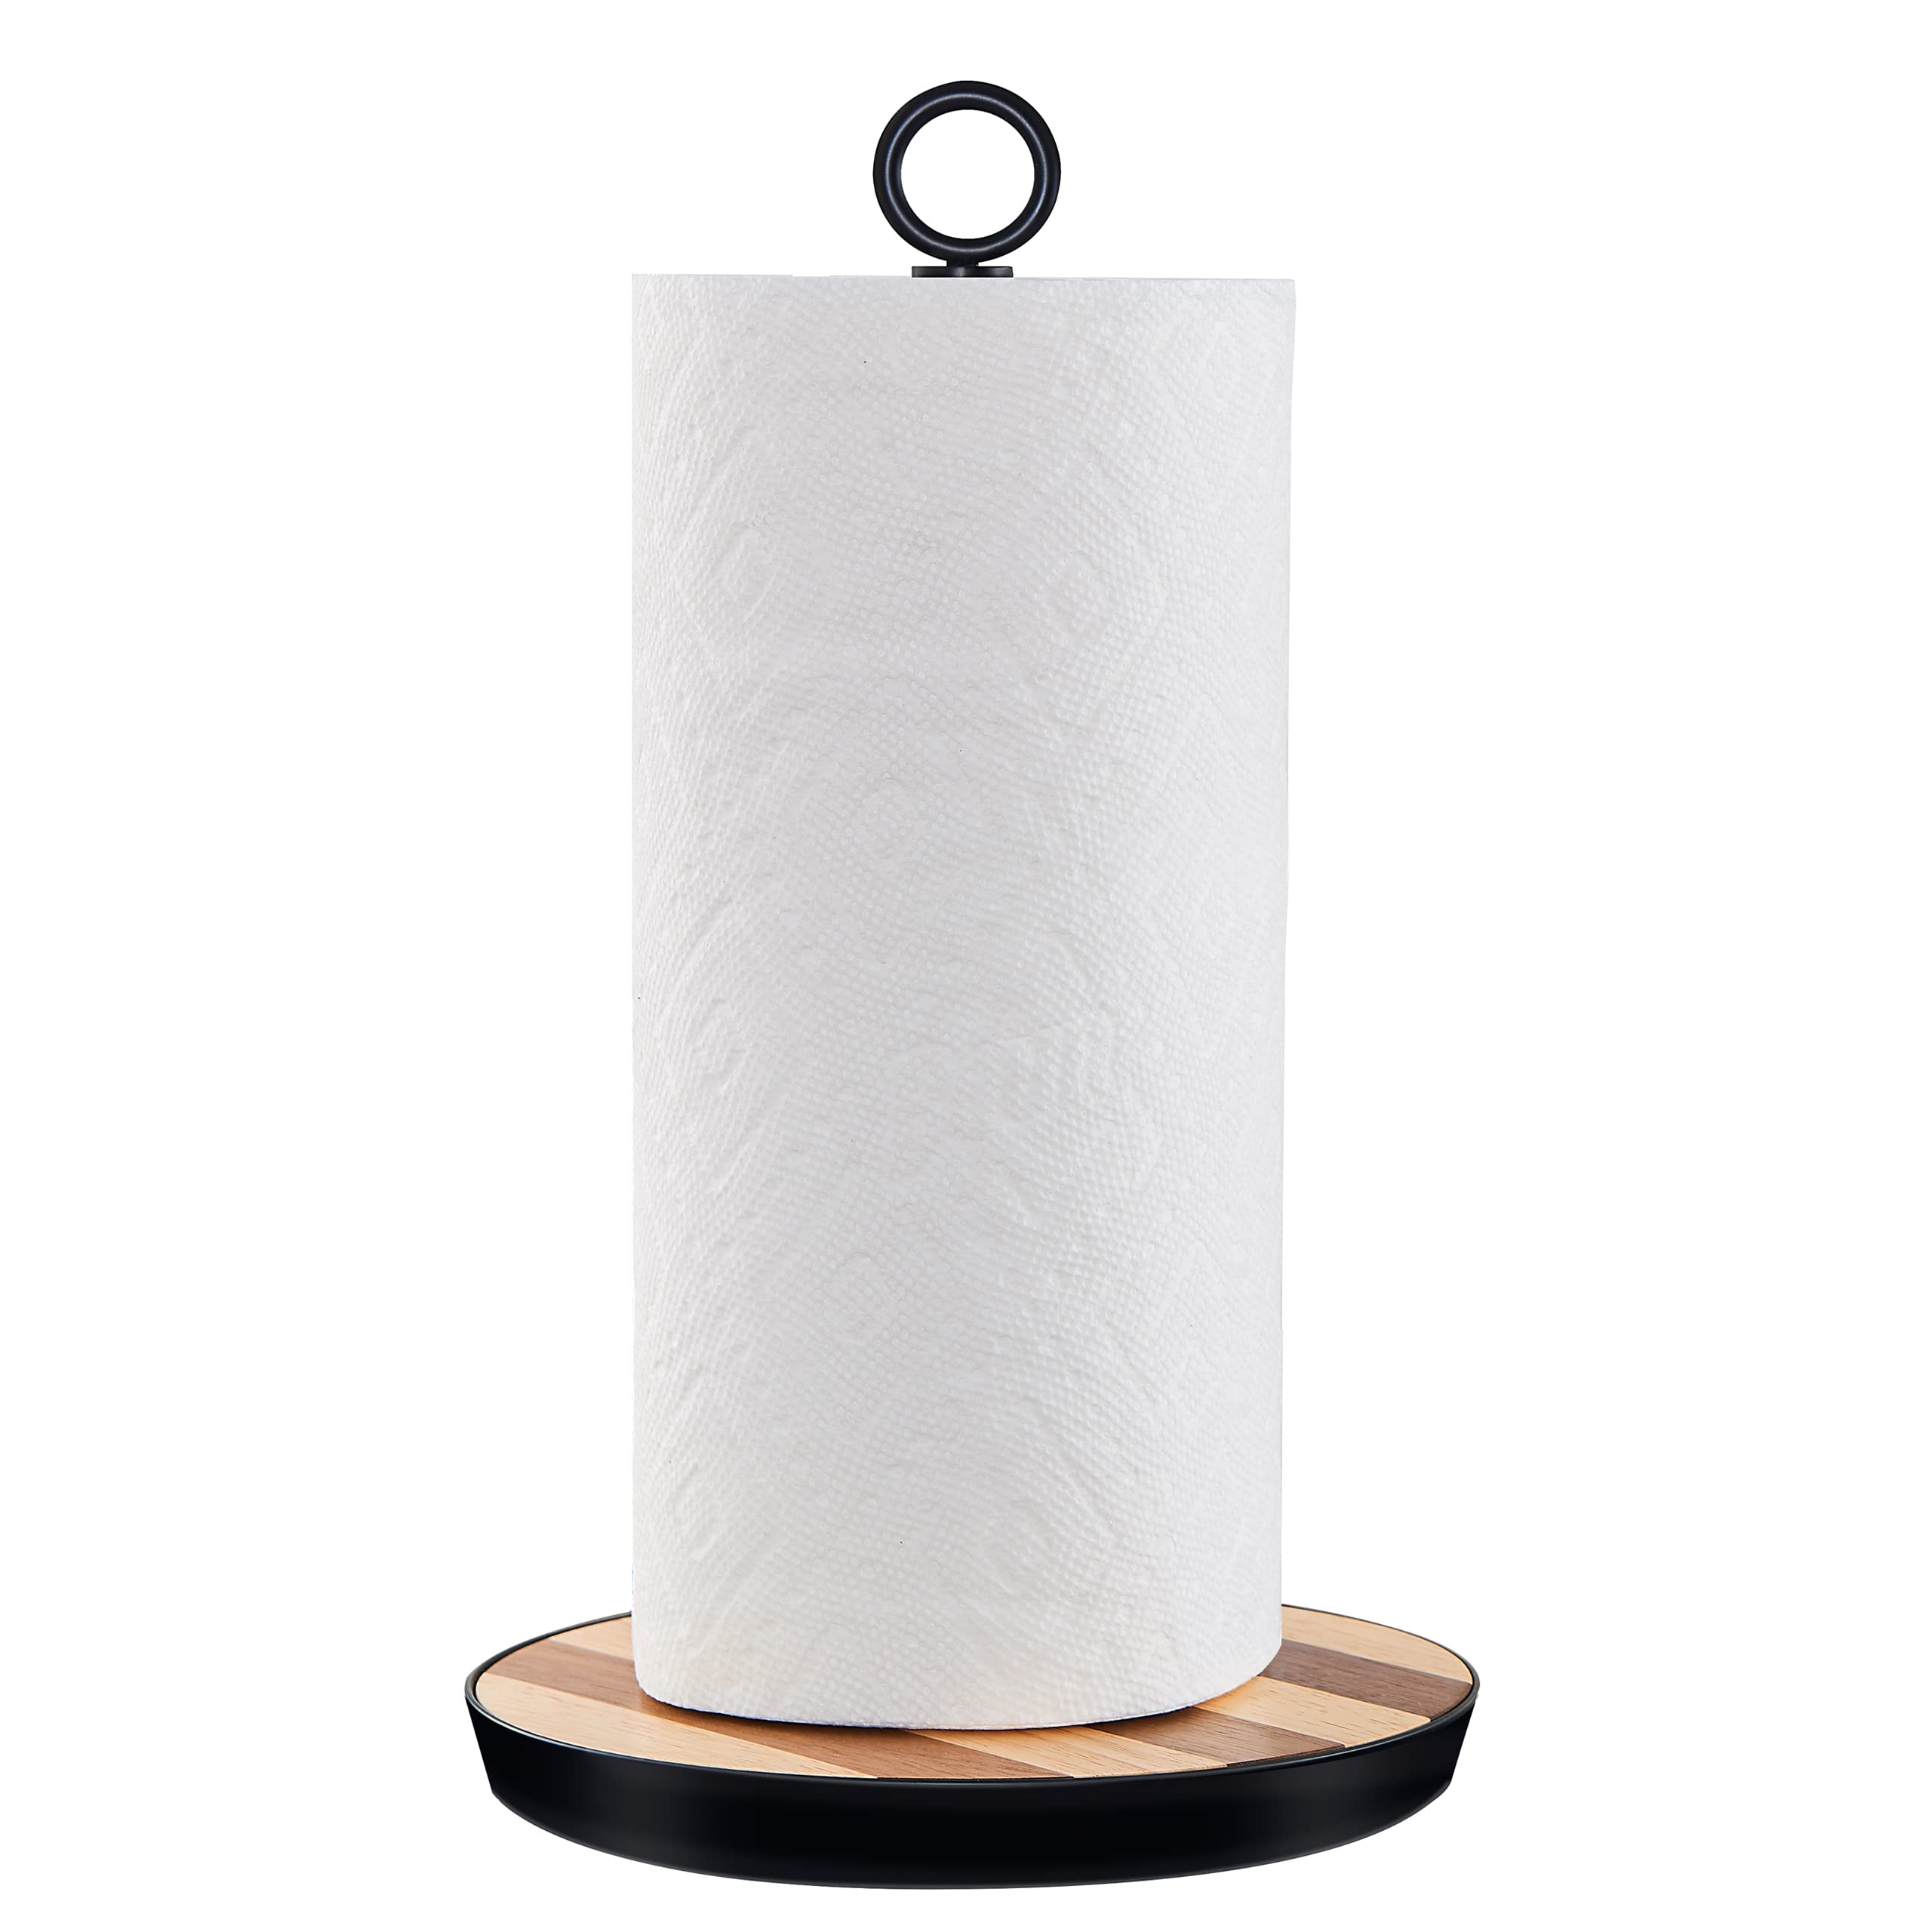 Paper Towel Holder, Paper Towel Holder Countertop with Heavy Weighted Multi-Color Wood Base for Standard or Jumbo-Sized Roll, Easy One-Handed Tear